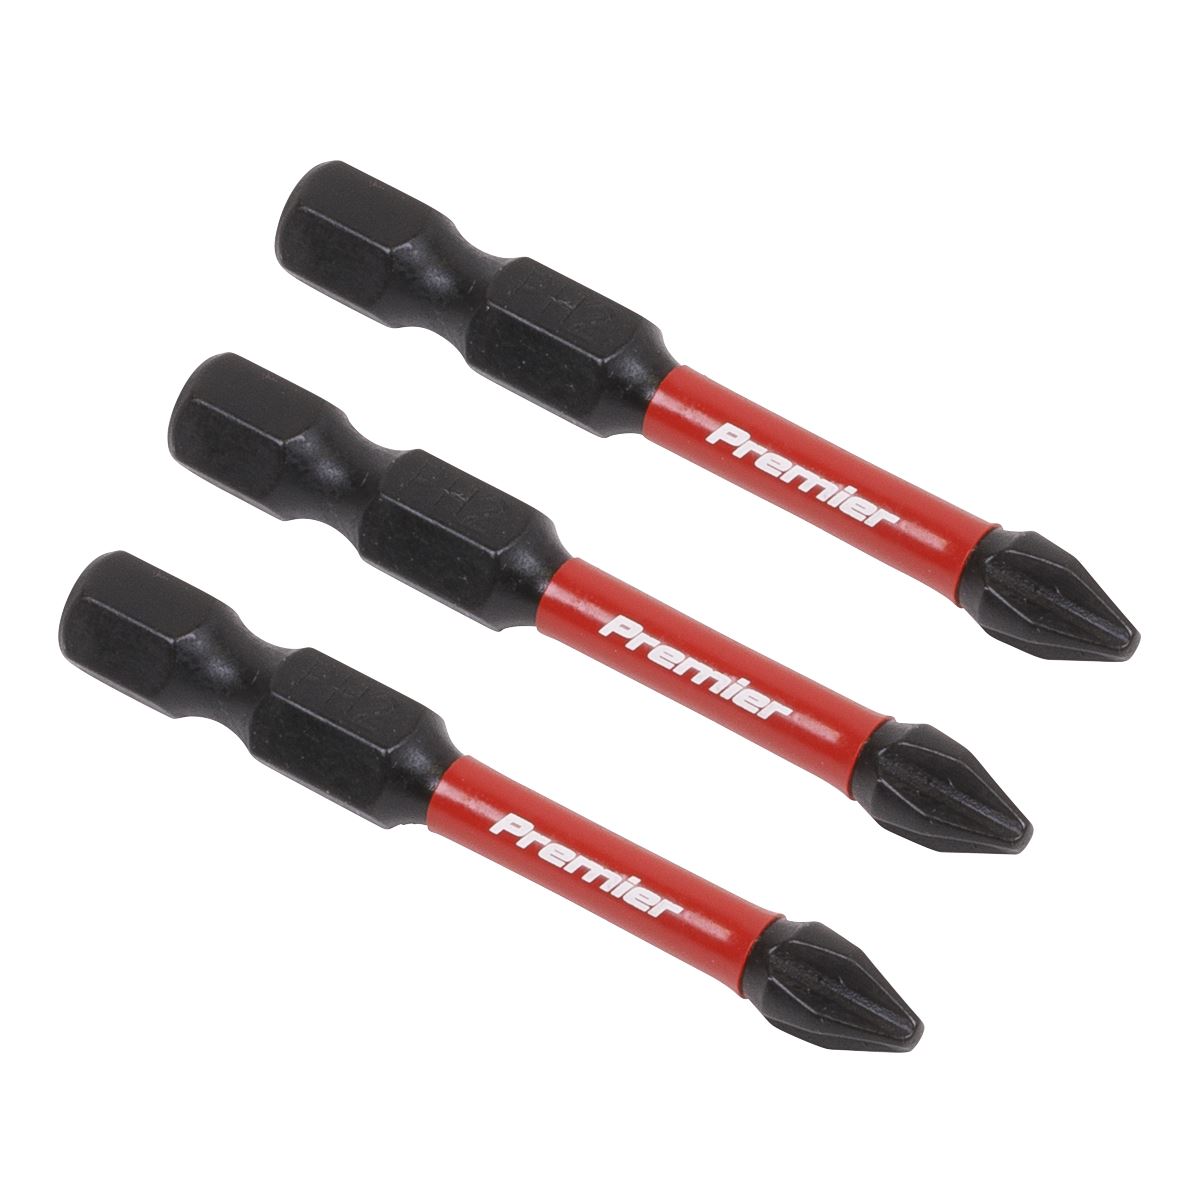 Sealey Premier Phillips #2 Impact Power Tool Bits 50mm - 3pc